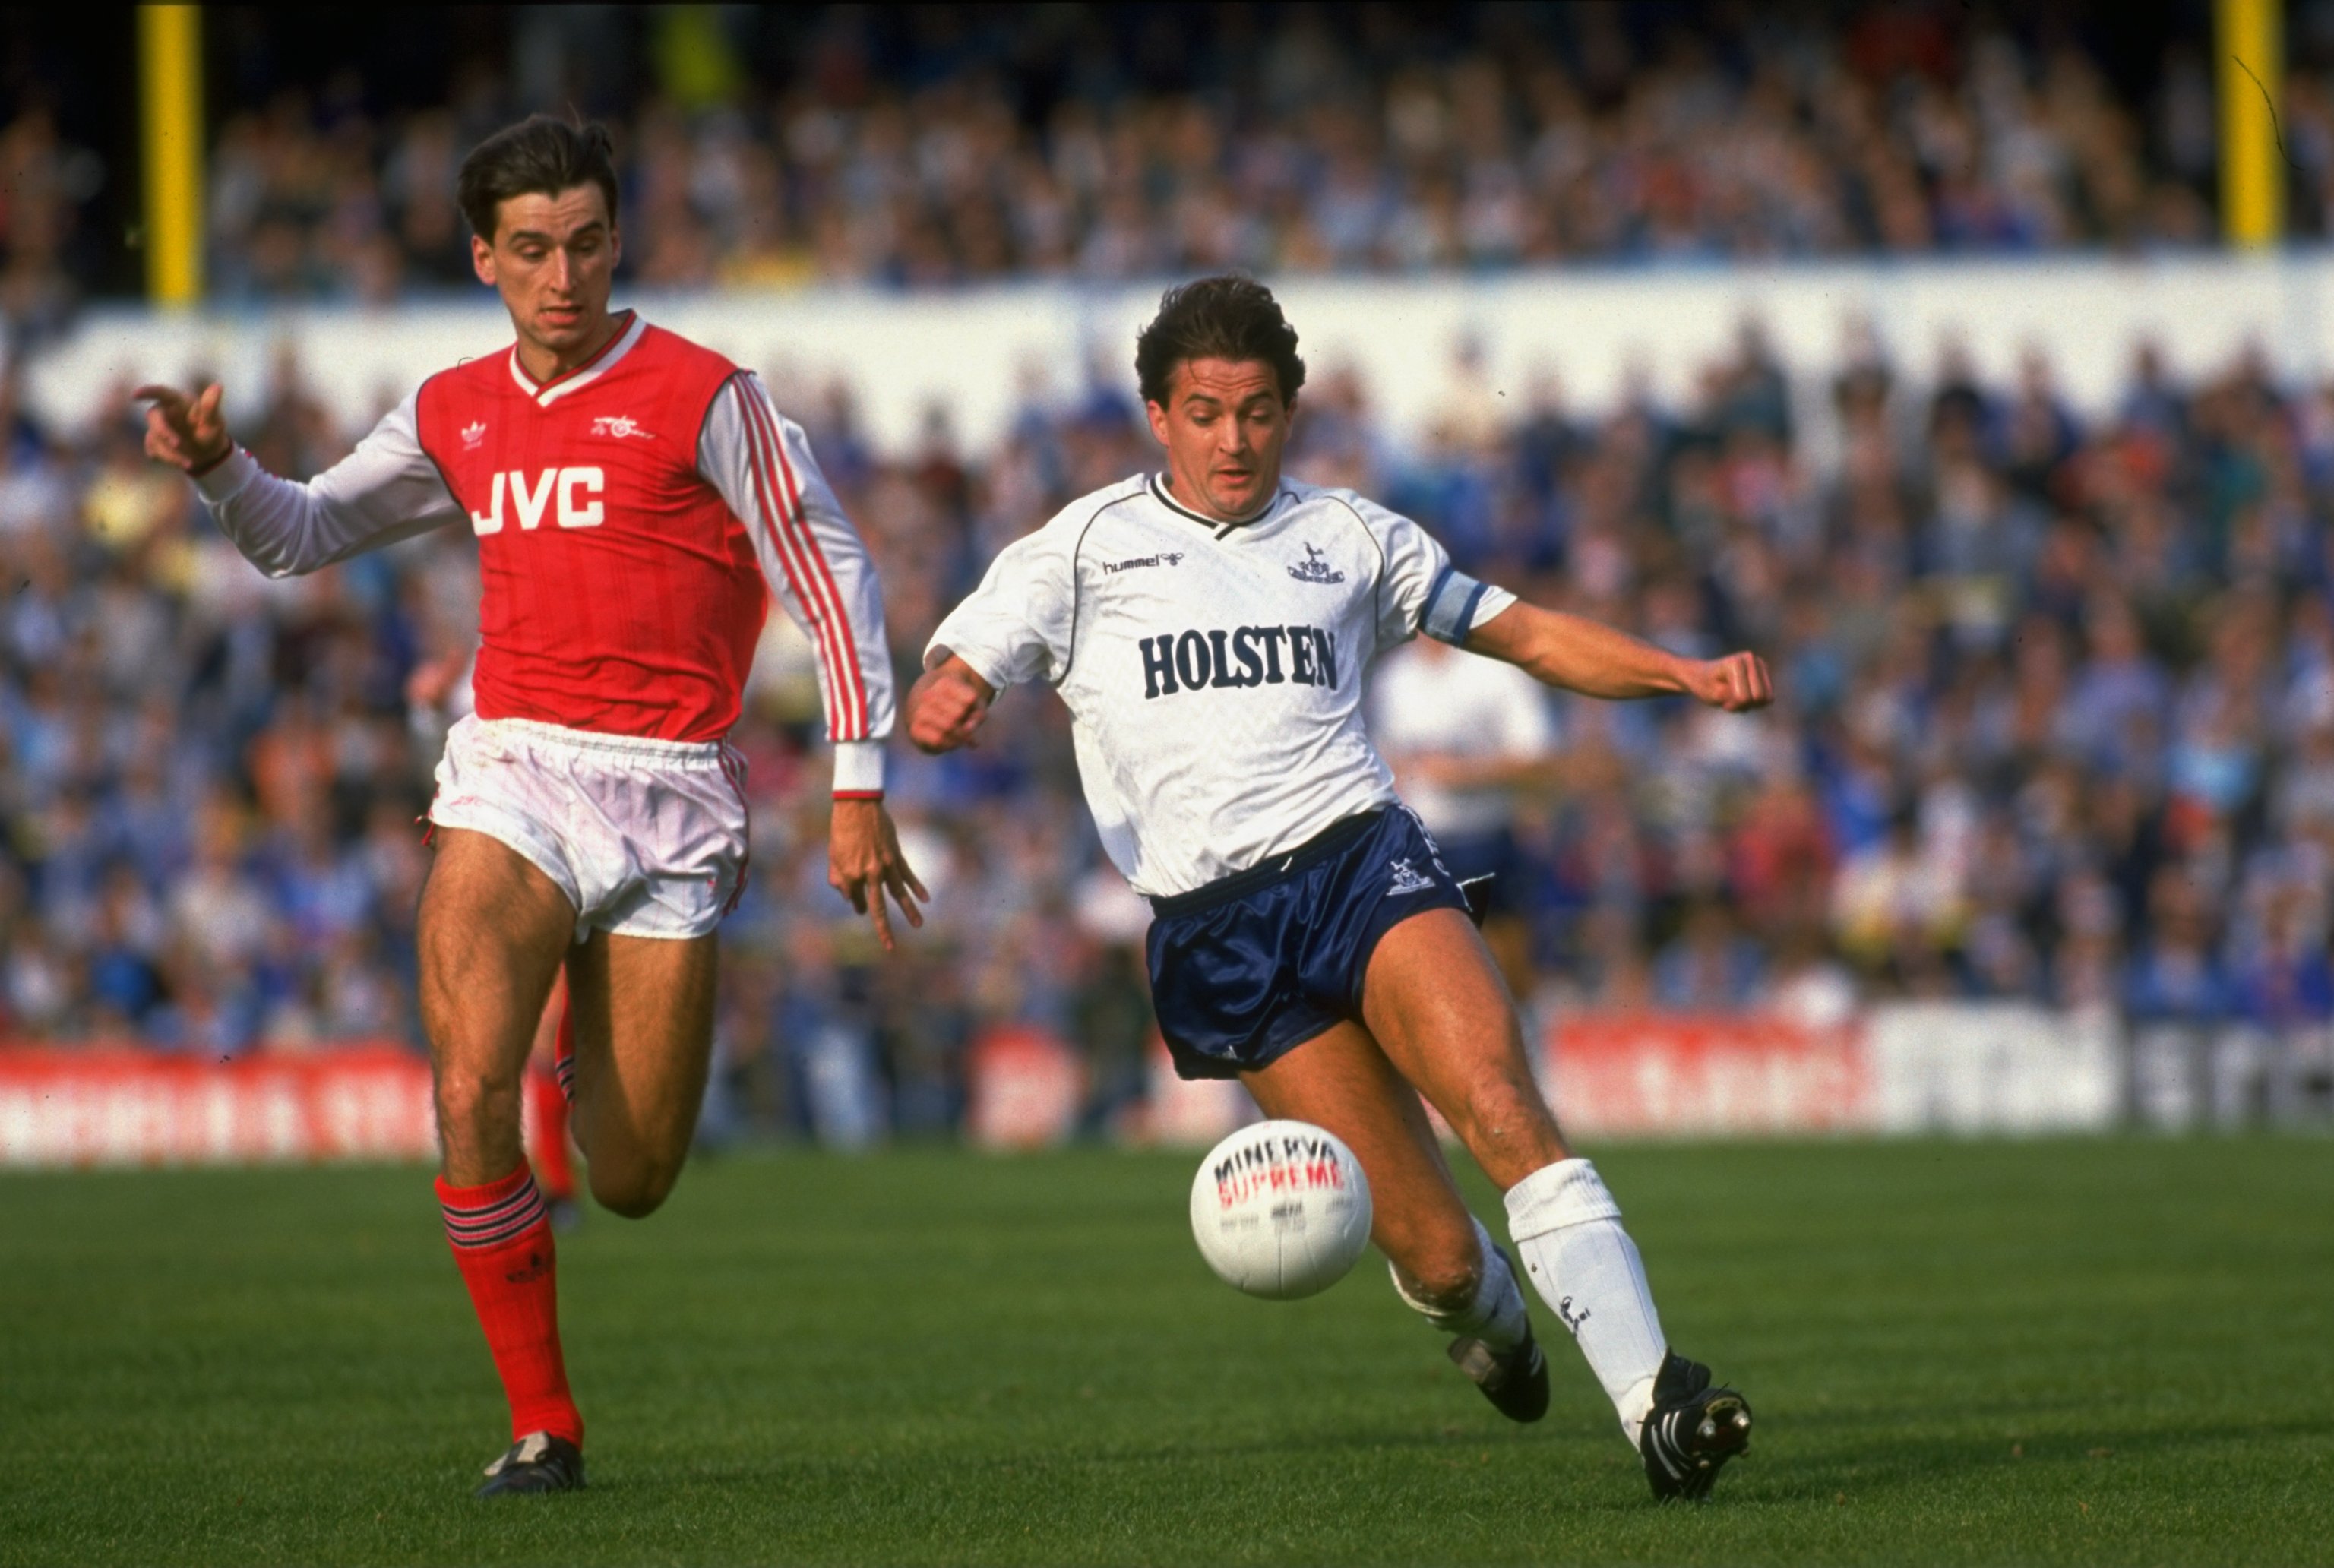 Arsenal's Alan Smith and Tottenham's Gary Mabbutt compete for a ball in a north London derby in 1988.